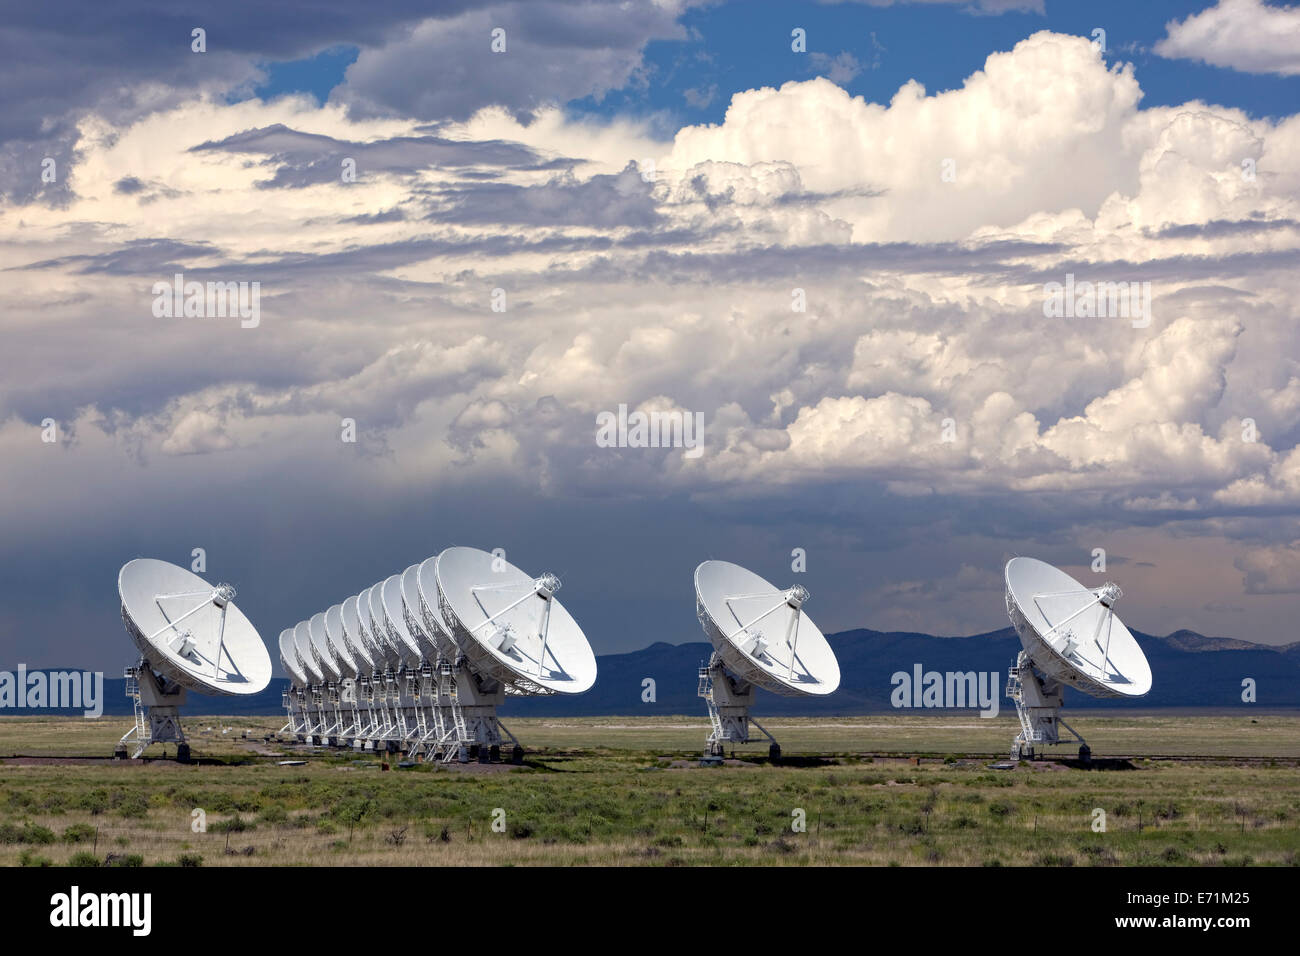 The VLA - Very Large Array - Radio Telescope in Socorro, New Mexico An astronomical interferometer is an array of telescopes or Stock Photo